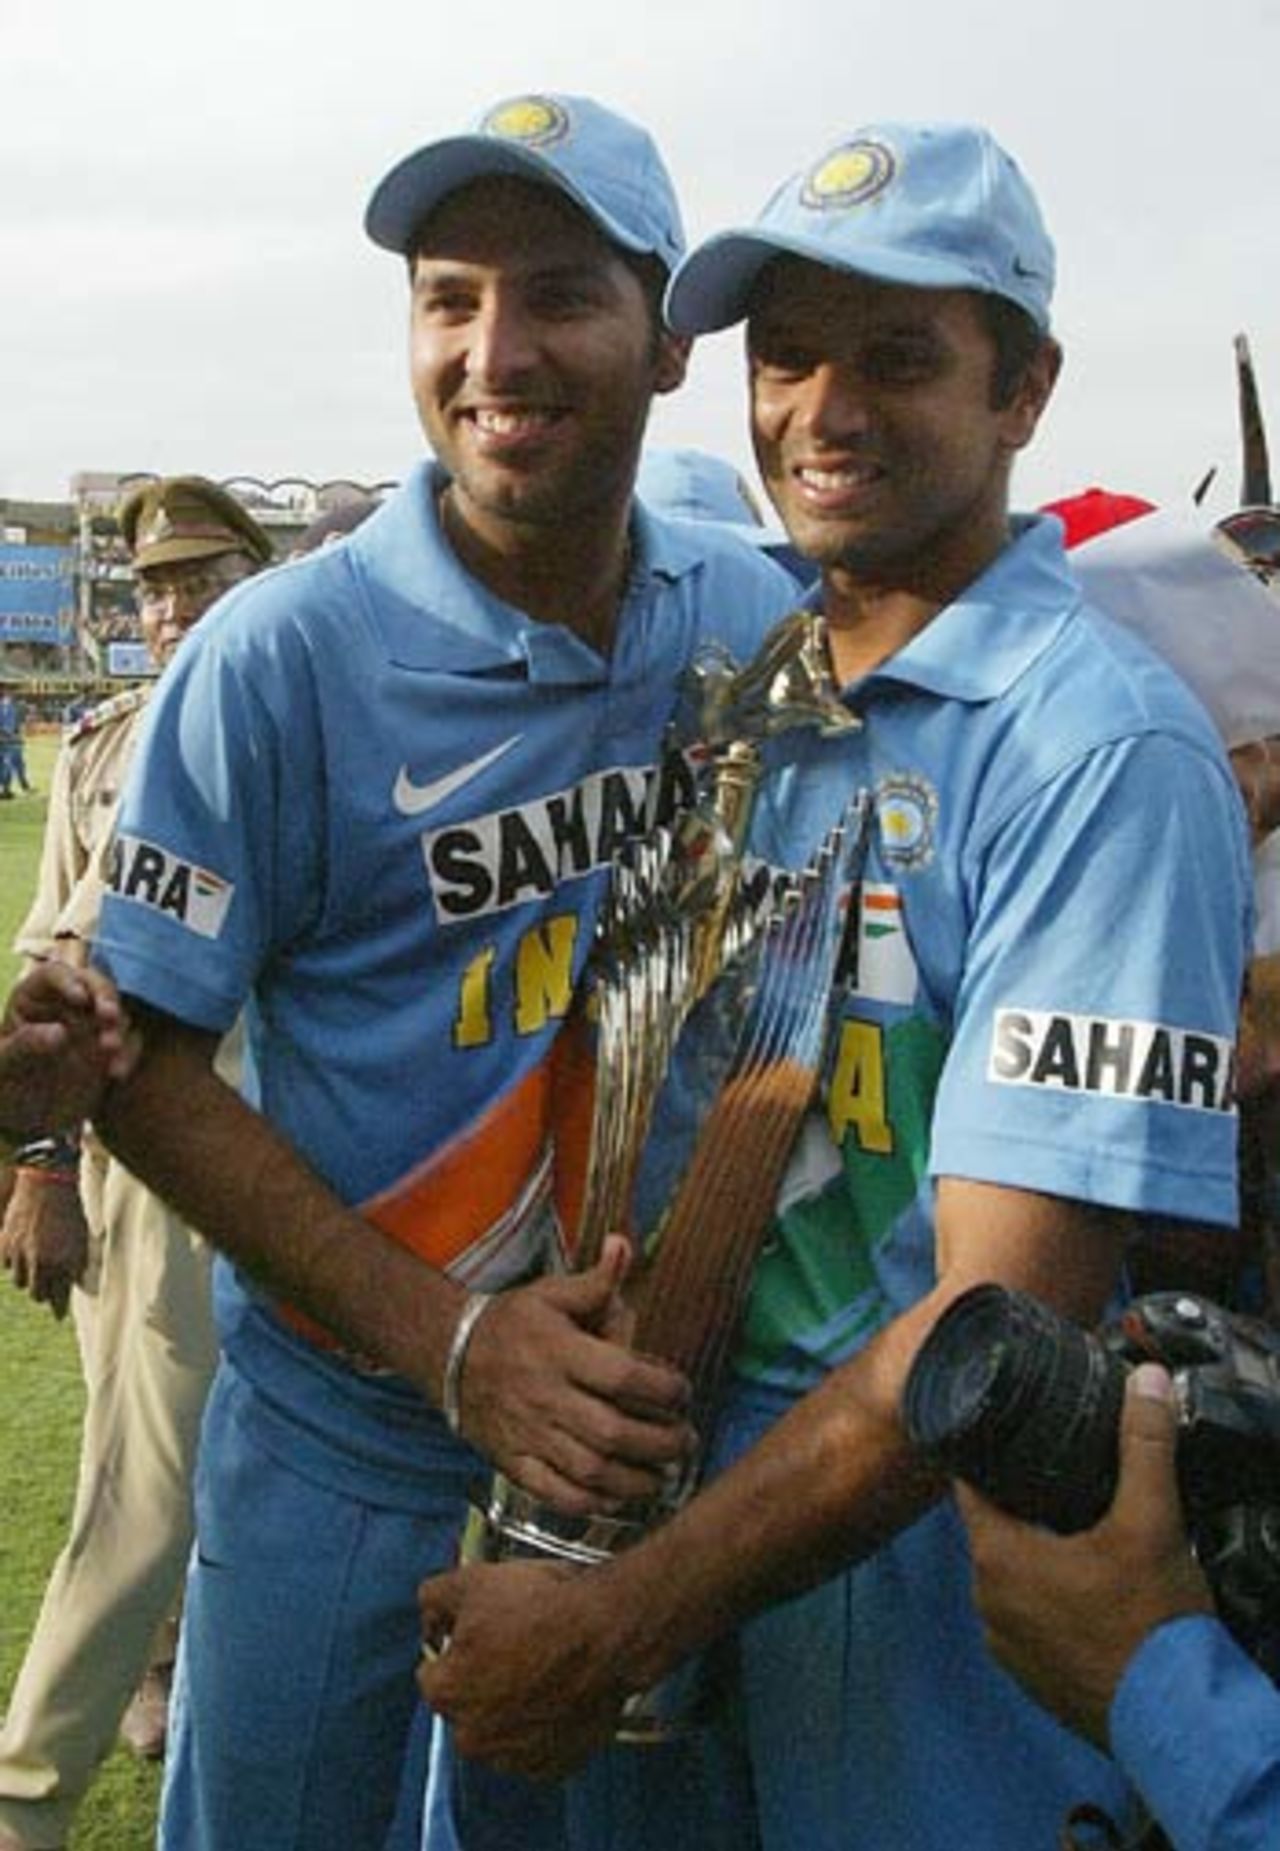 A job well done: Rahul Dravid and Yuvraj Singh with the trophy, India v England, 7th ODI, Indore, April 15 2006